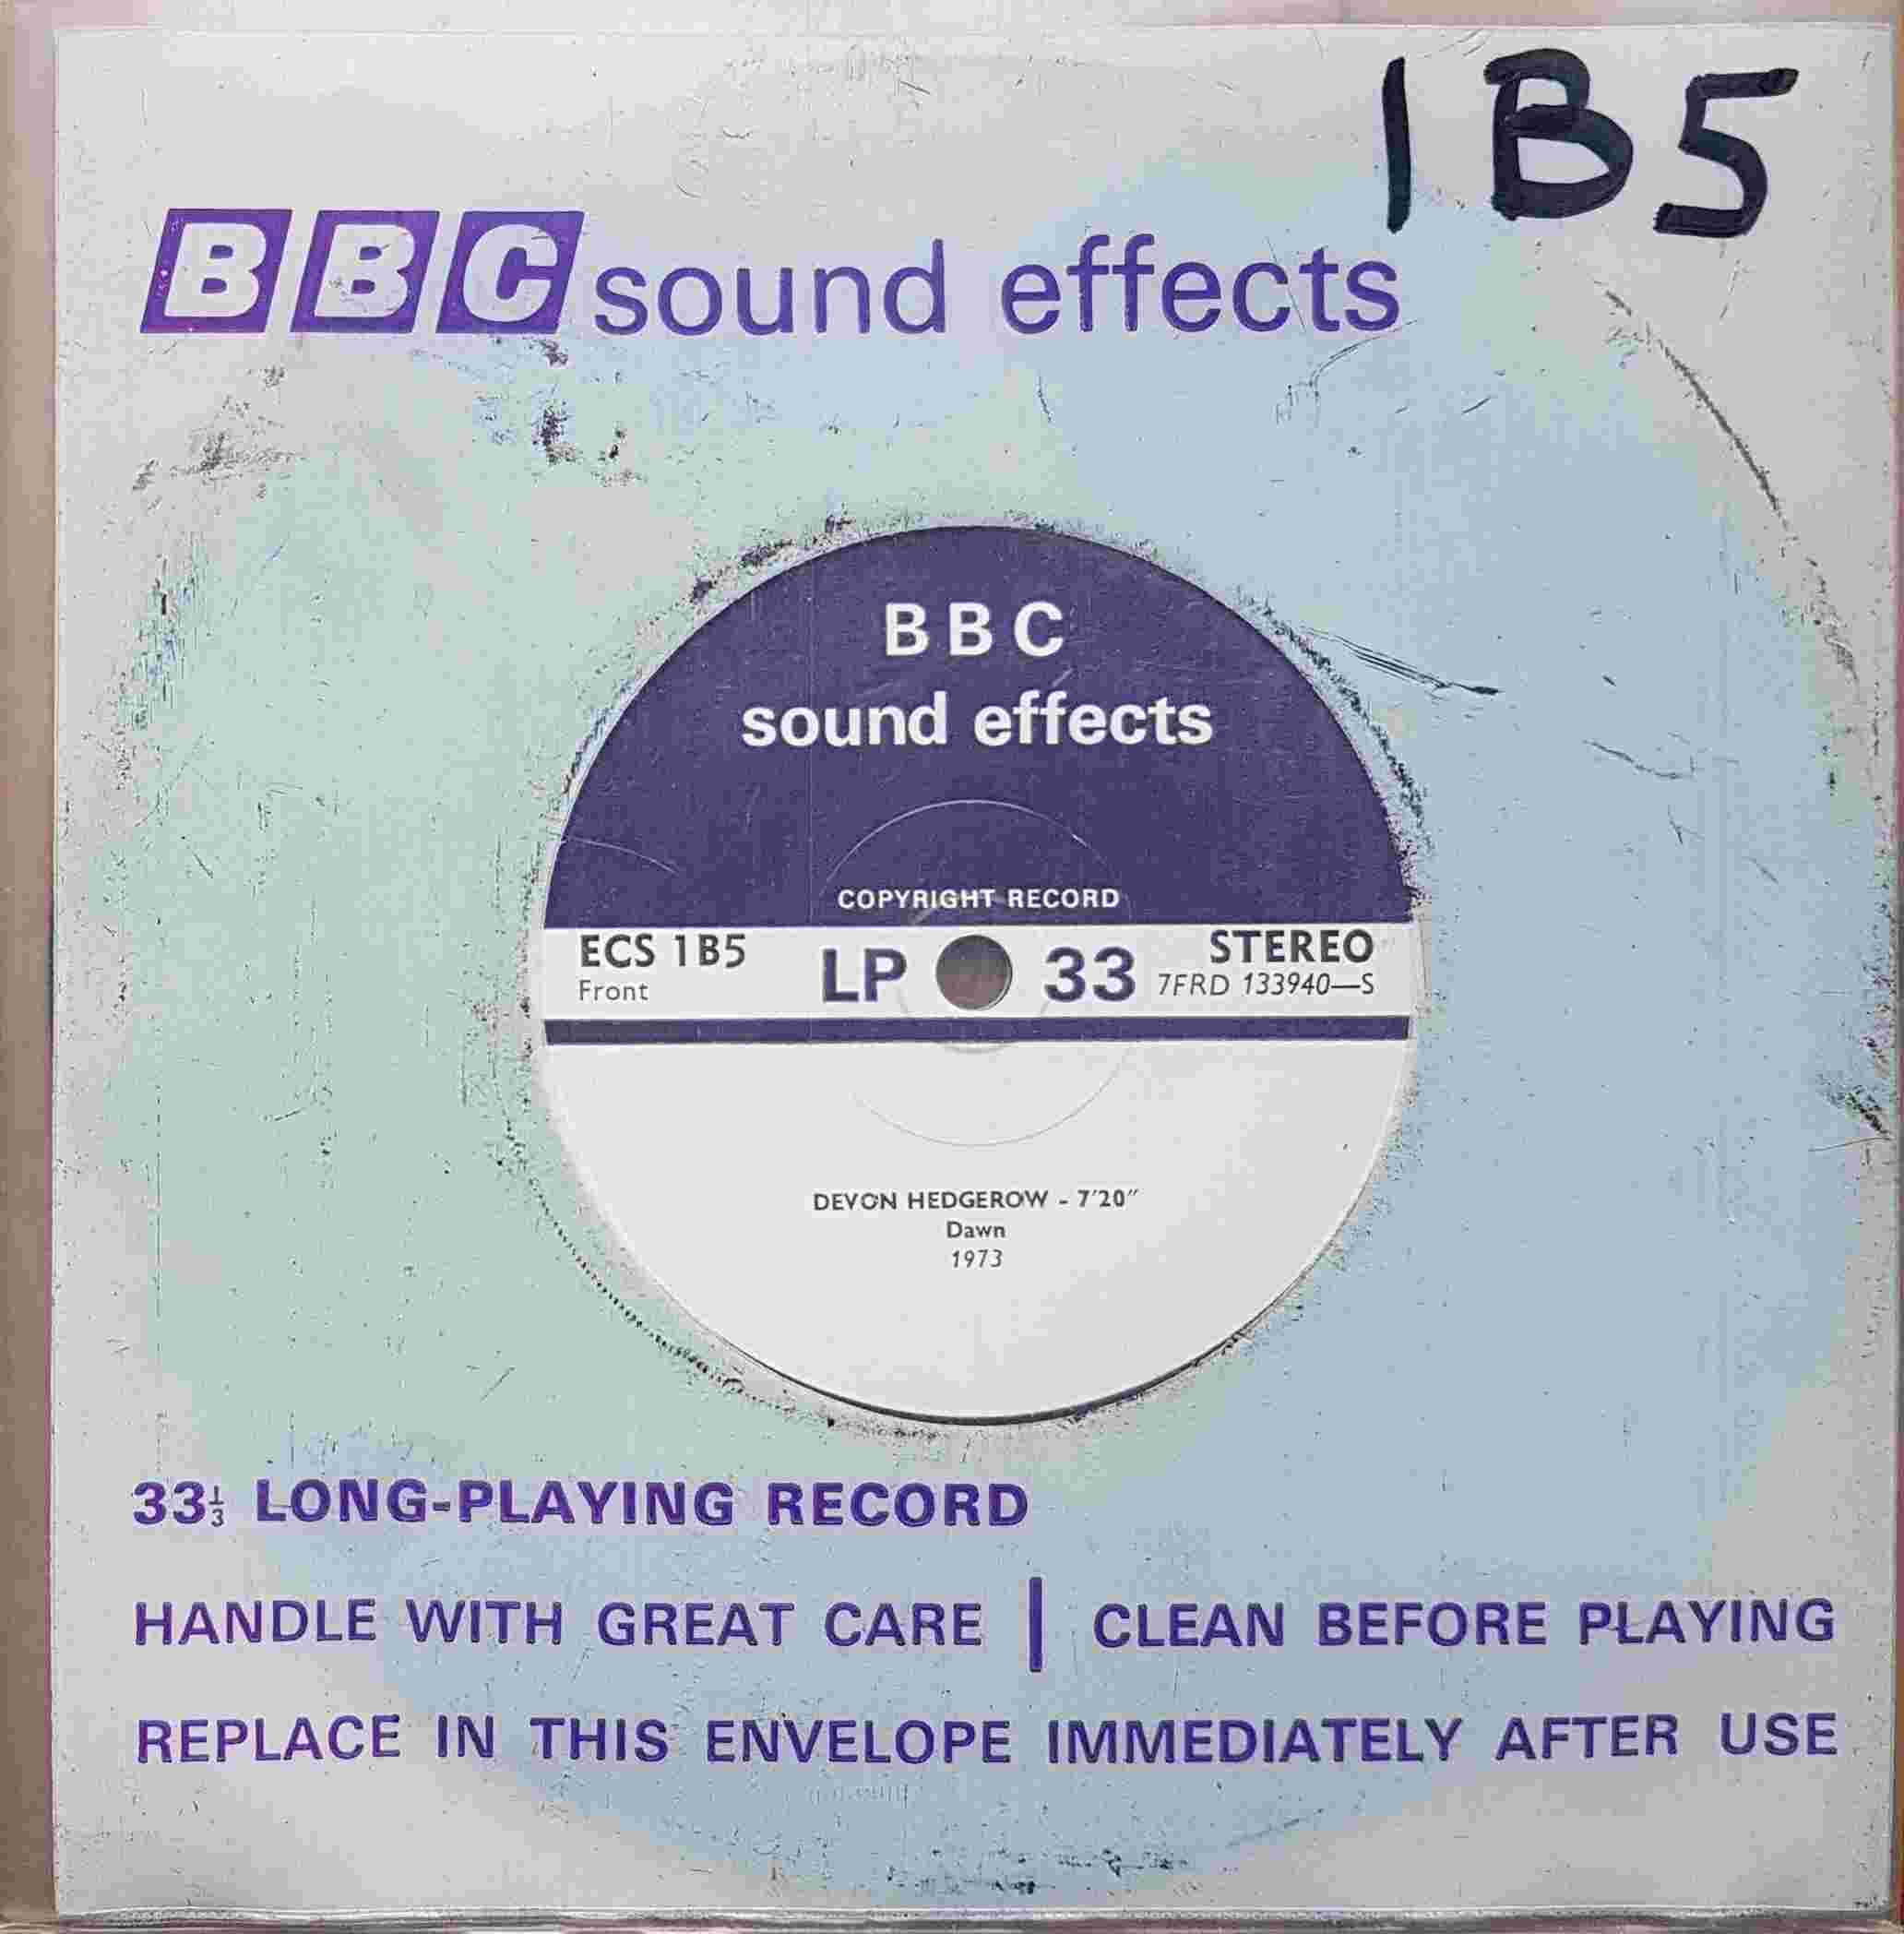 Picture of ECS 1B5 Devon hedgerow by artist Not registered from the BBC singles - Records and Tapes library